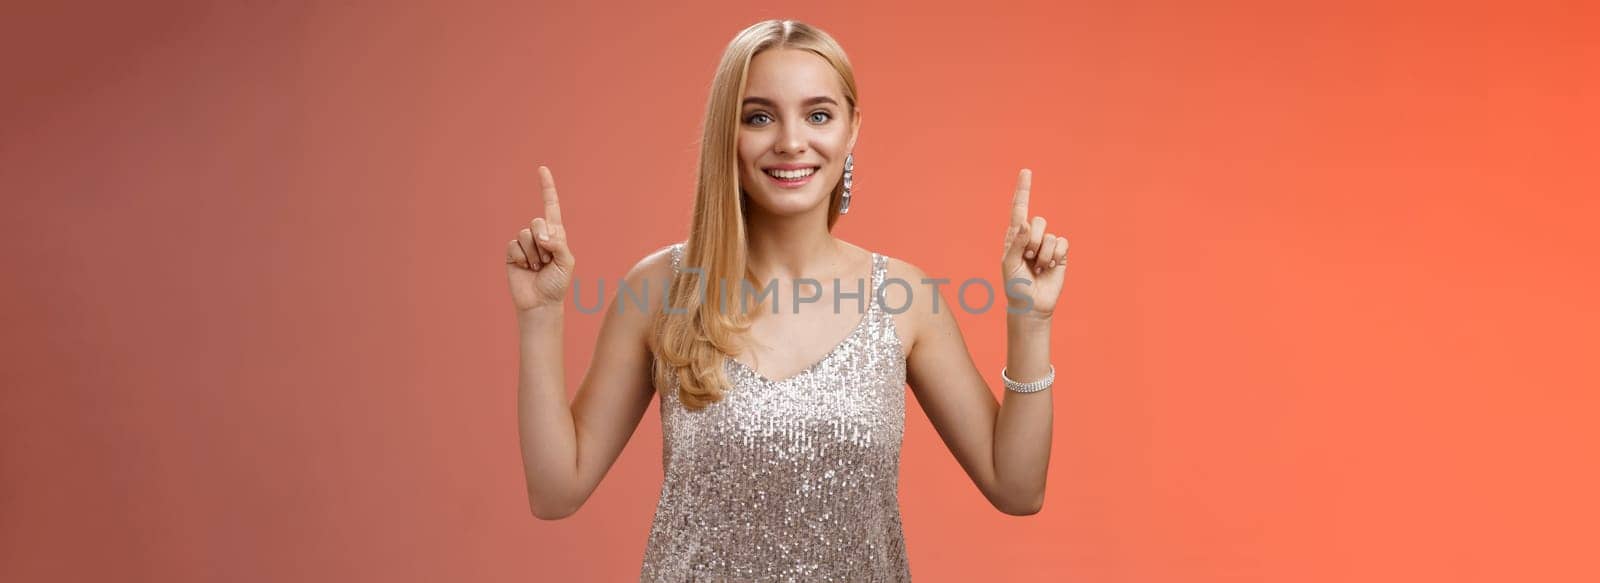 Charming feminine tender blond woman in silver party dress raise hands pointing up smiling delighted recommend awesome cosmetics good product service, standing happily grinning red background.